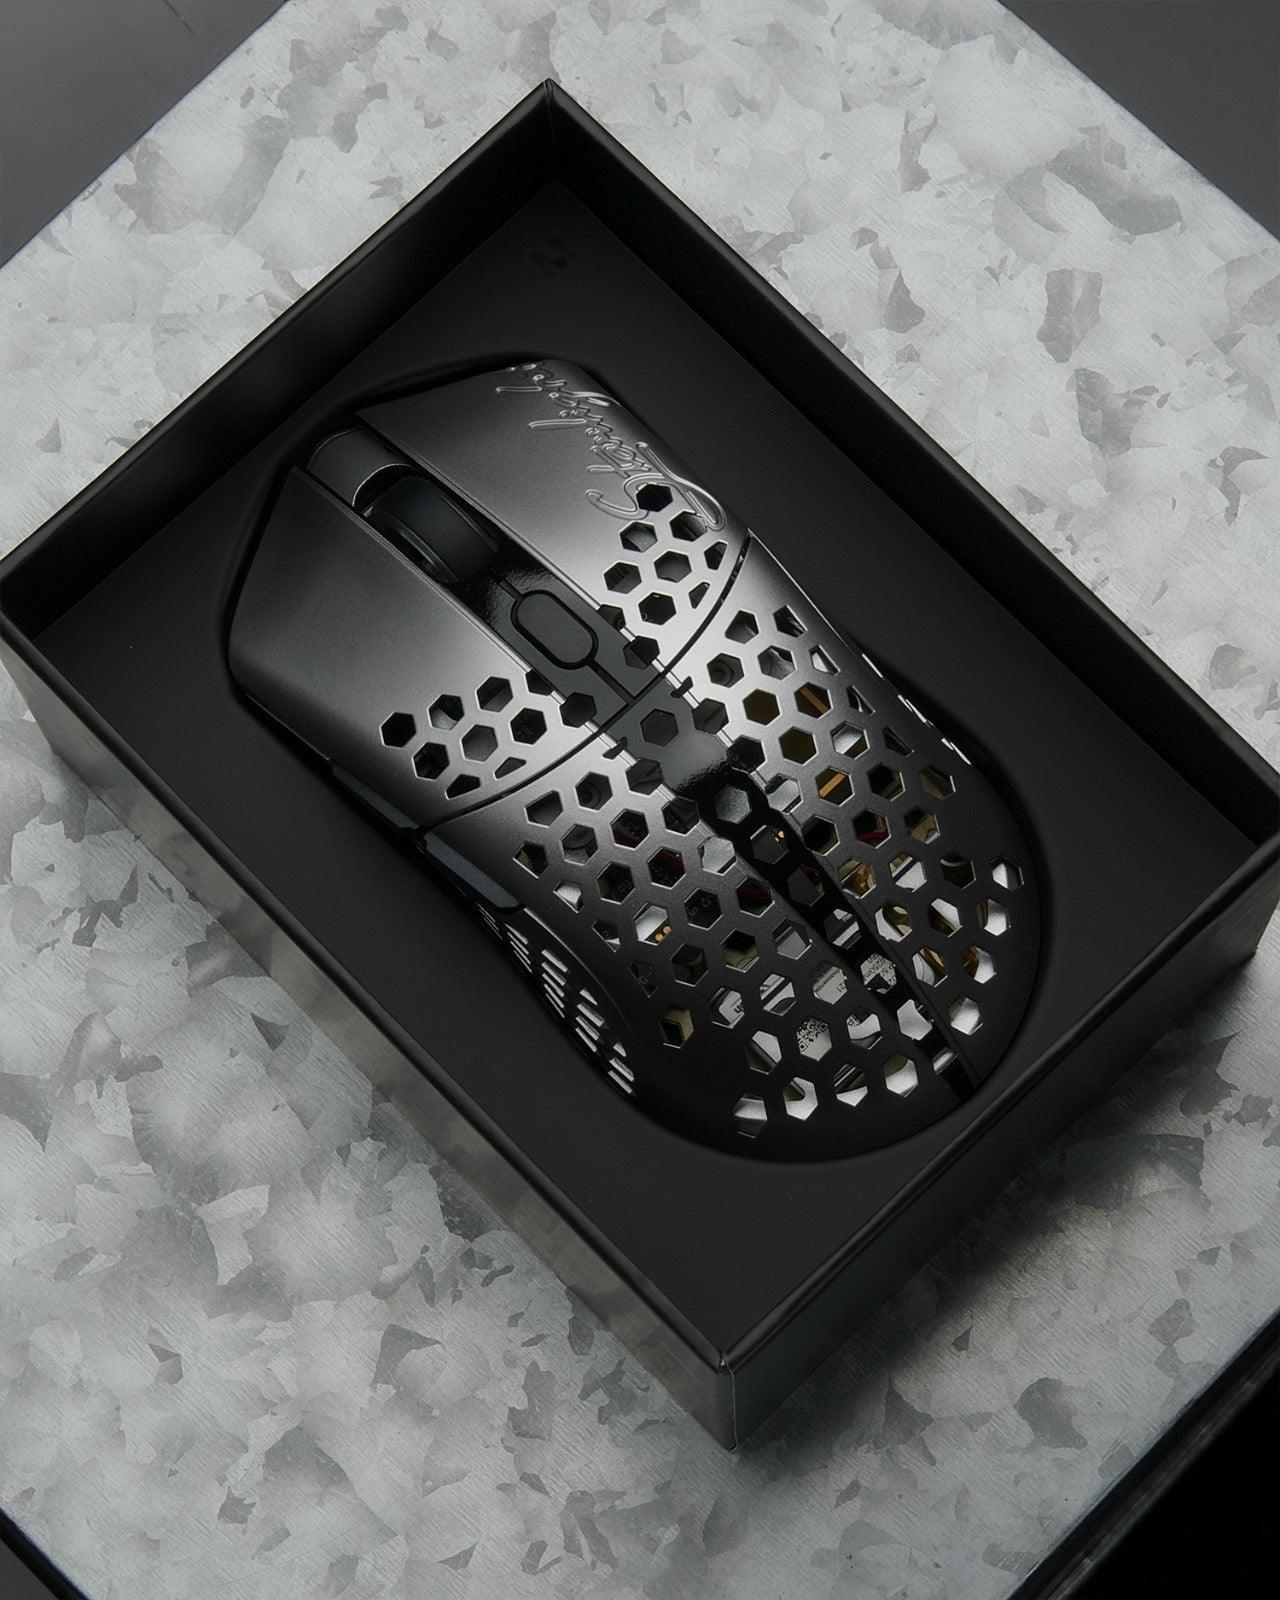 Starlight TenZ Small Finalmouse - PC/タブレット